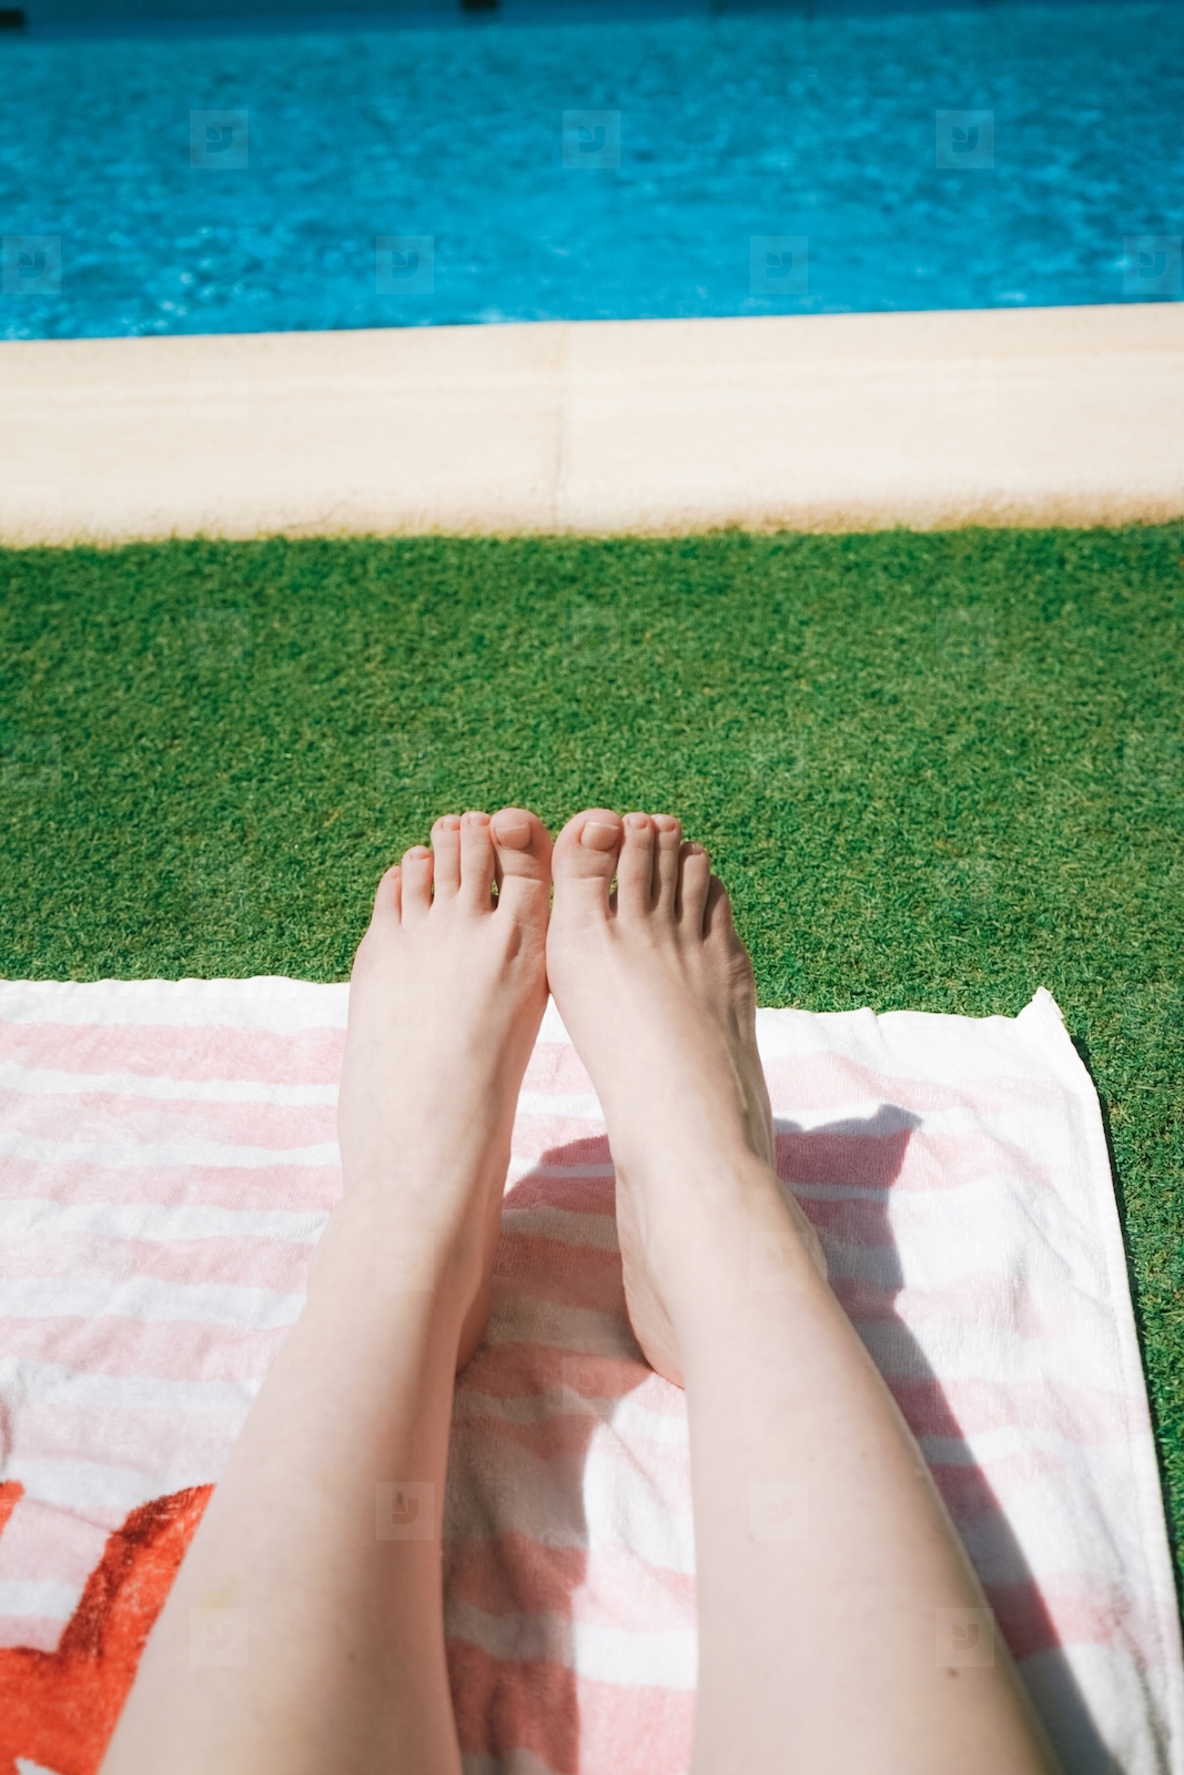 Feet and legs of a woman in a swimming pool